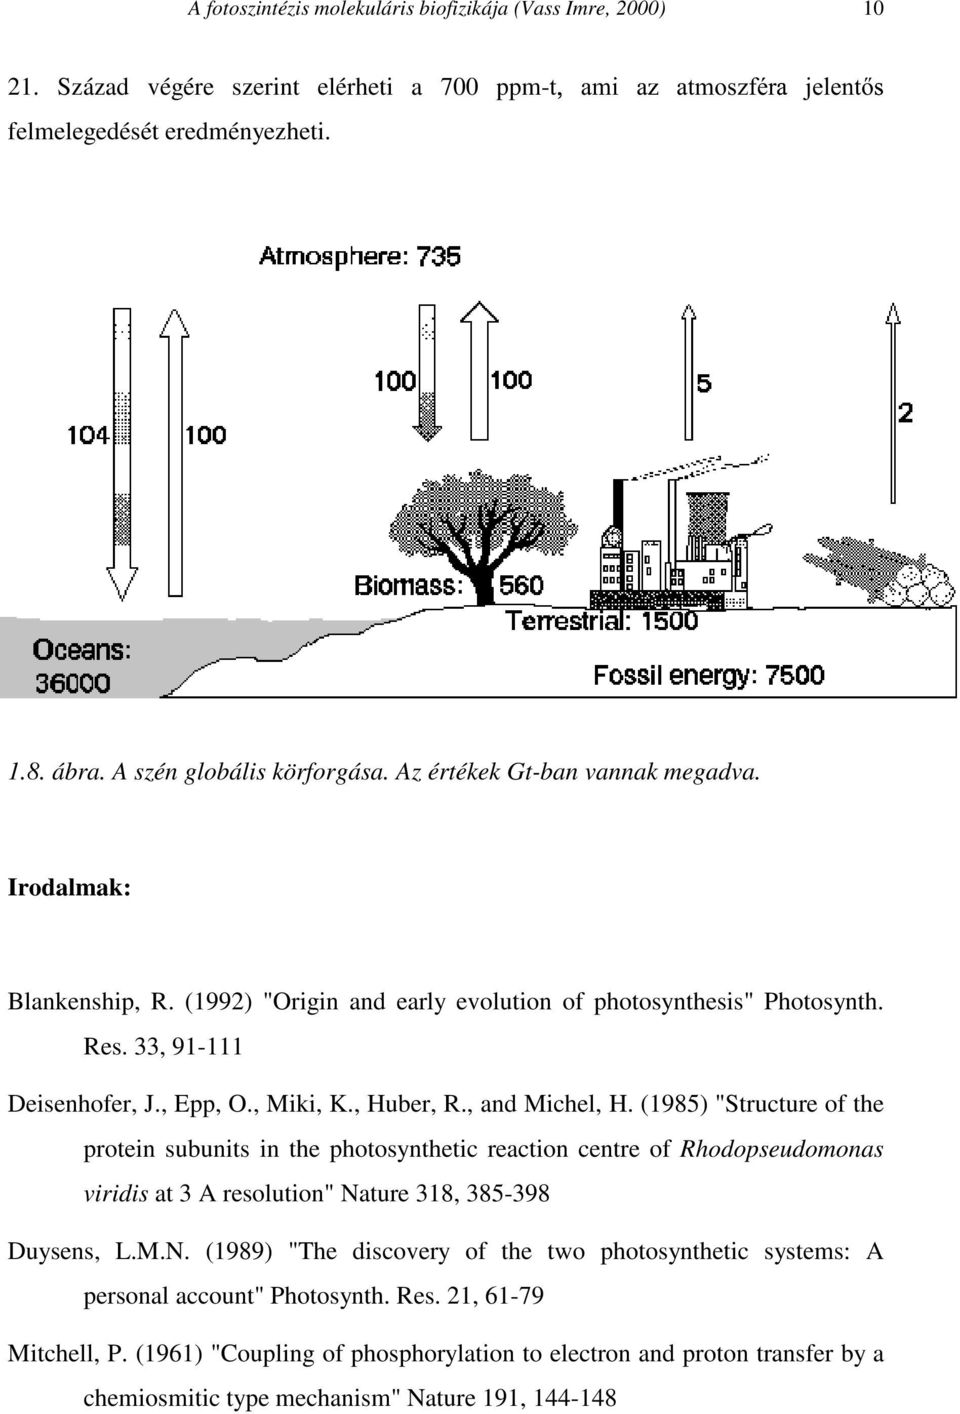 , Miki, K., Huber, R., and Michel, H. (1985) "Structure of the protein subunits in the photosynthetic reaction centre of Rhodopseudomonas viridis at 3 A resolution" Na